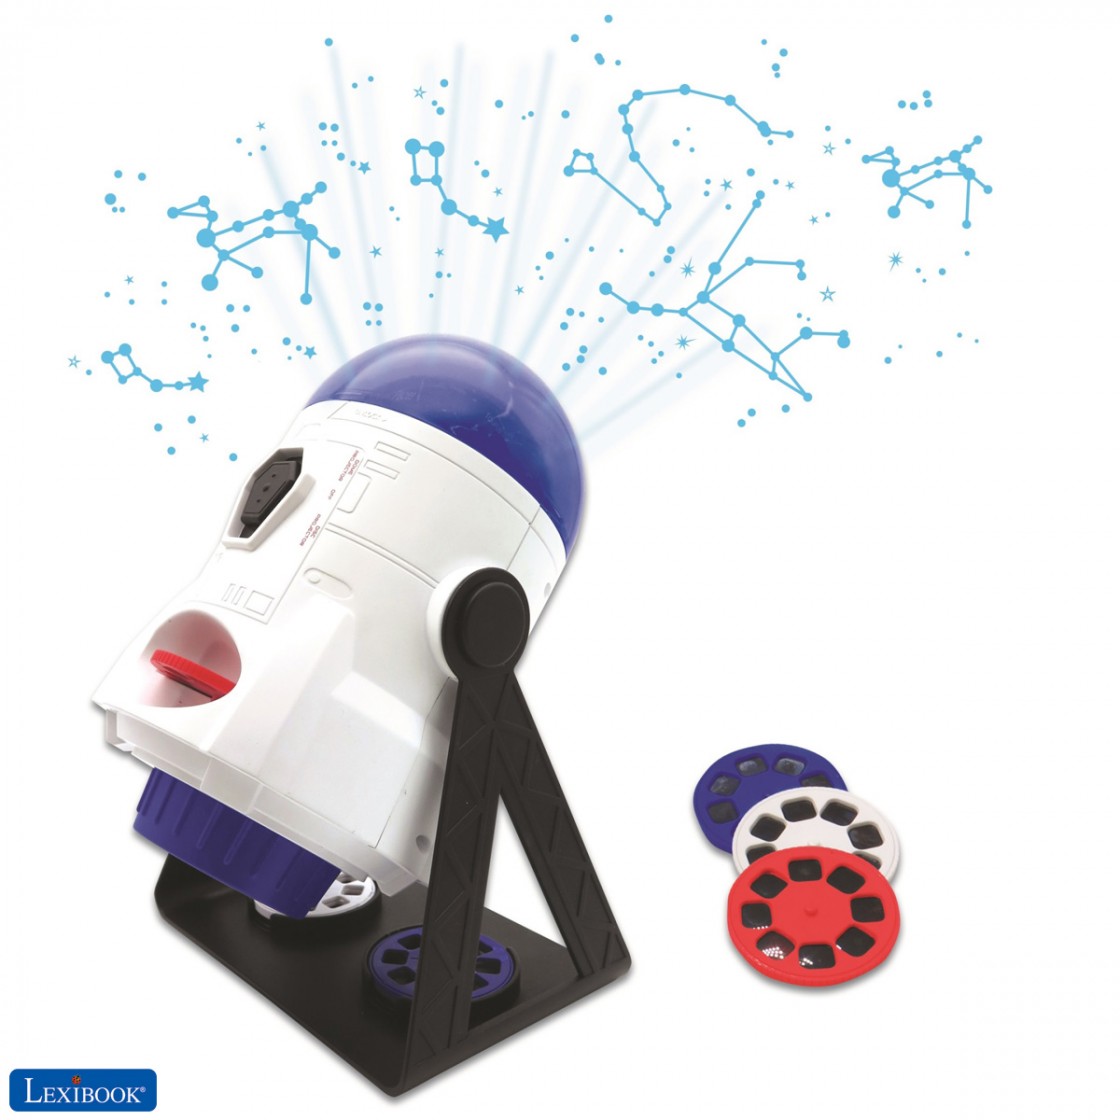 2-in-1 Constellations and Images Planetarium Projector